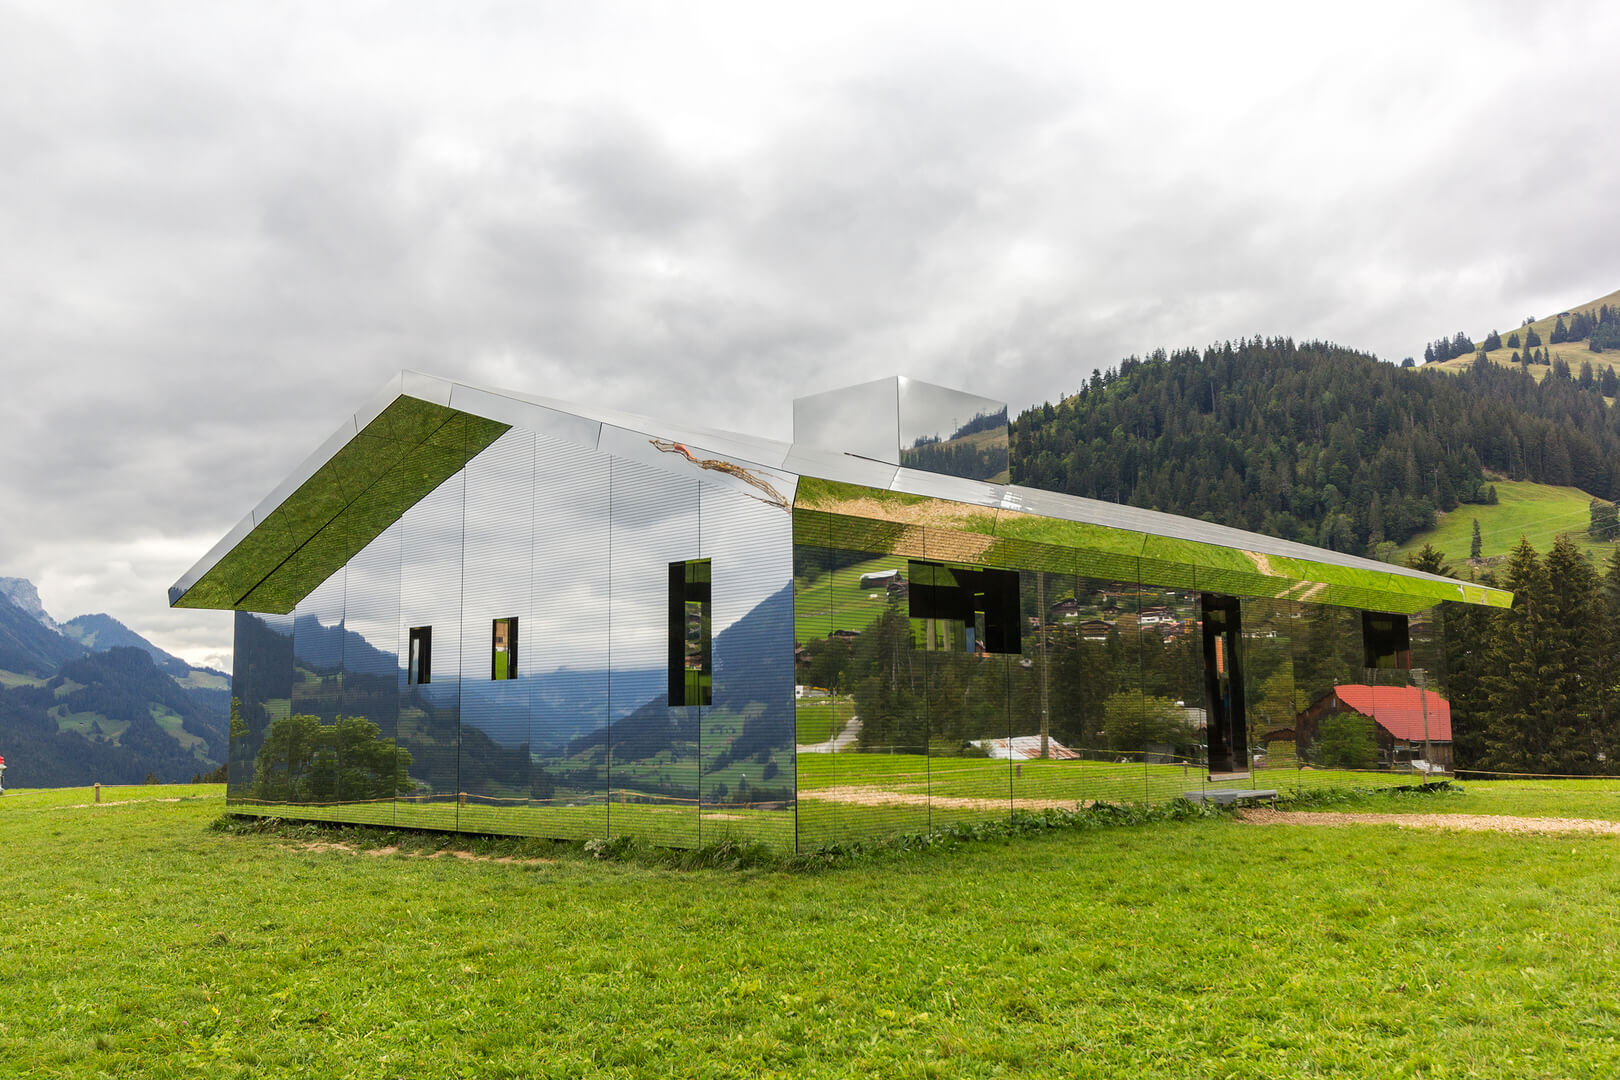 Gstaad, Switzerland : Doug Altken's mirror house on the Swiss Alps to reflect the landscape